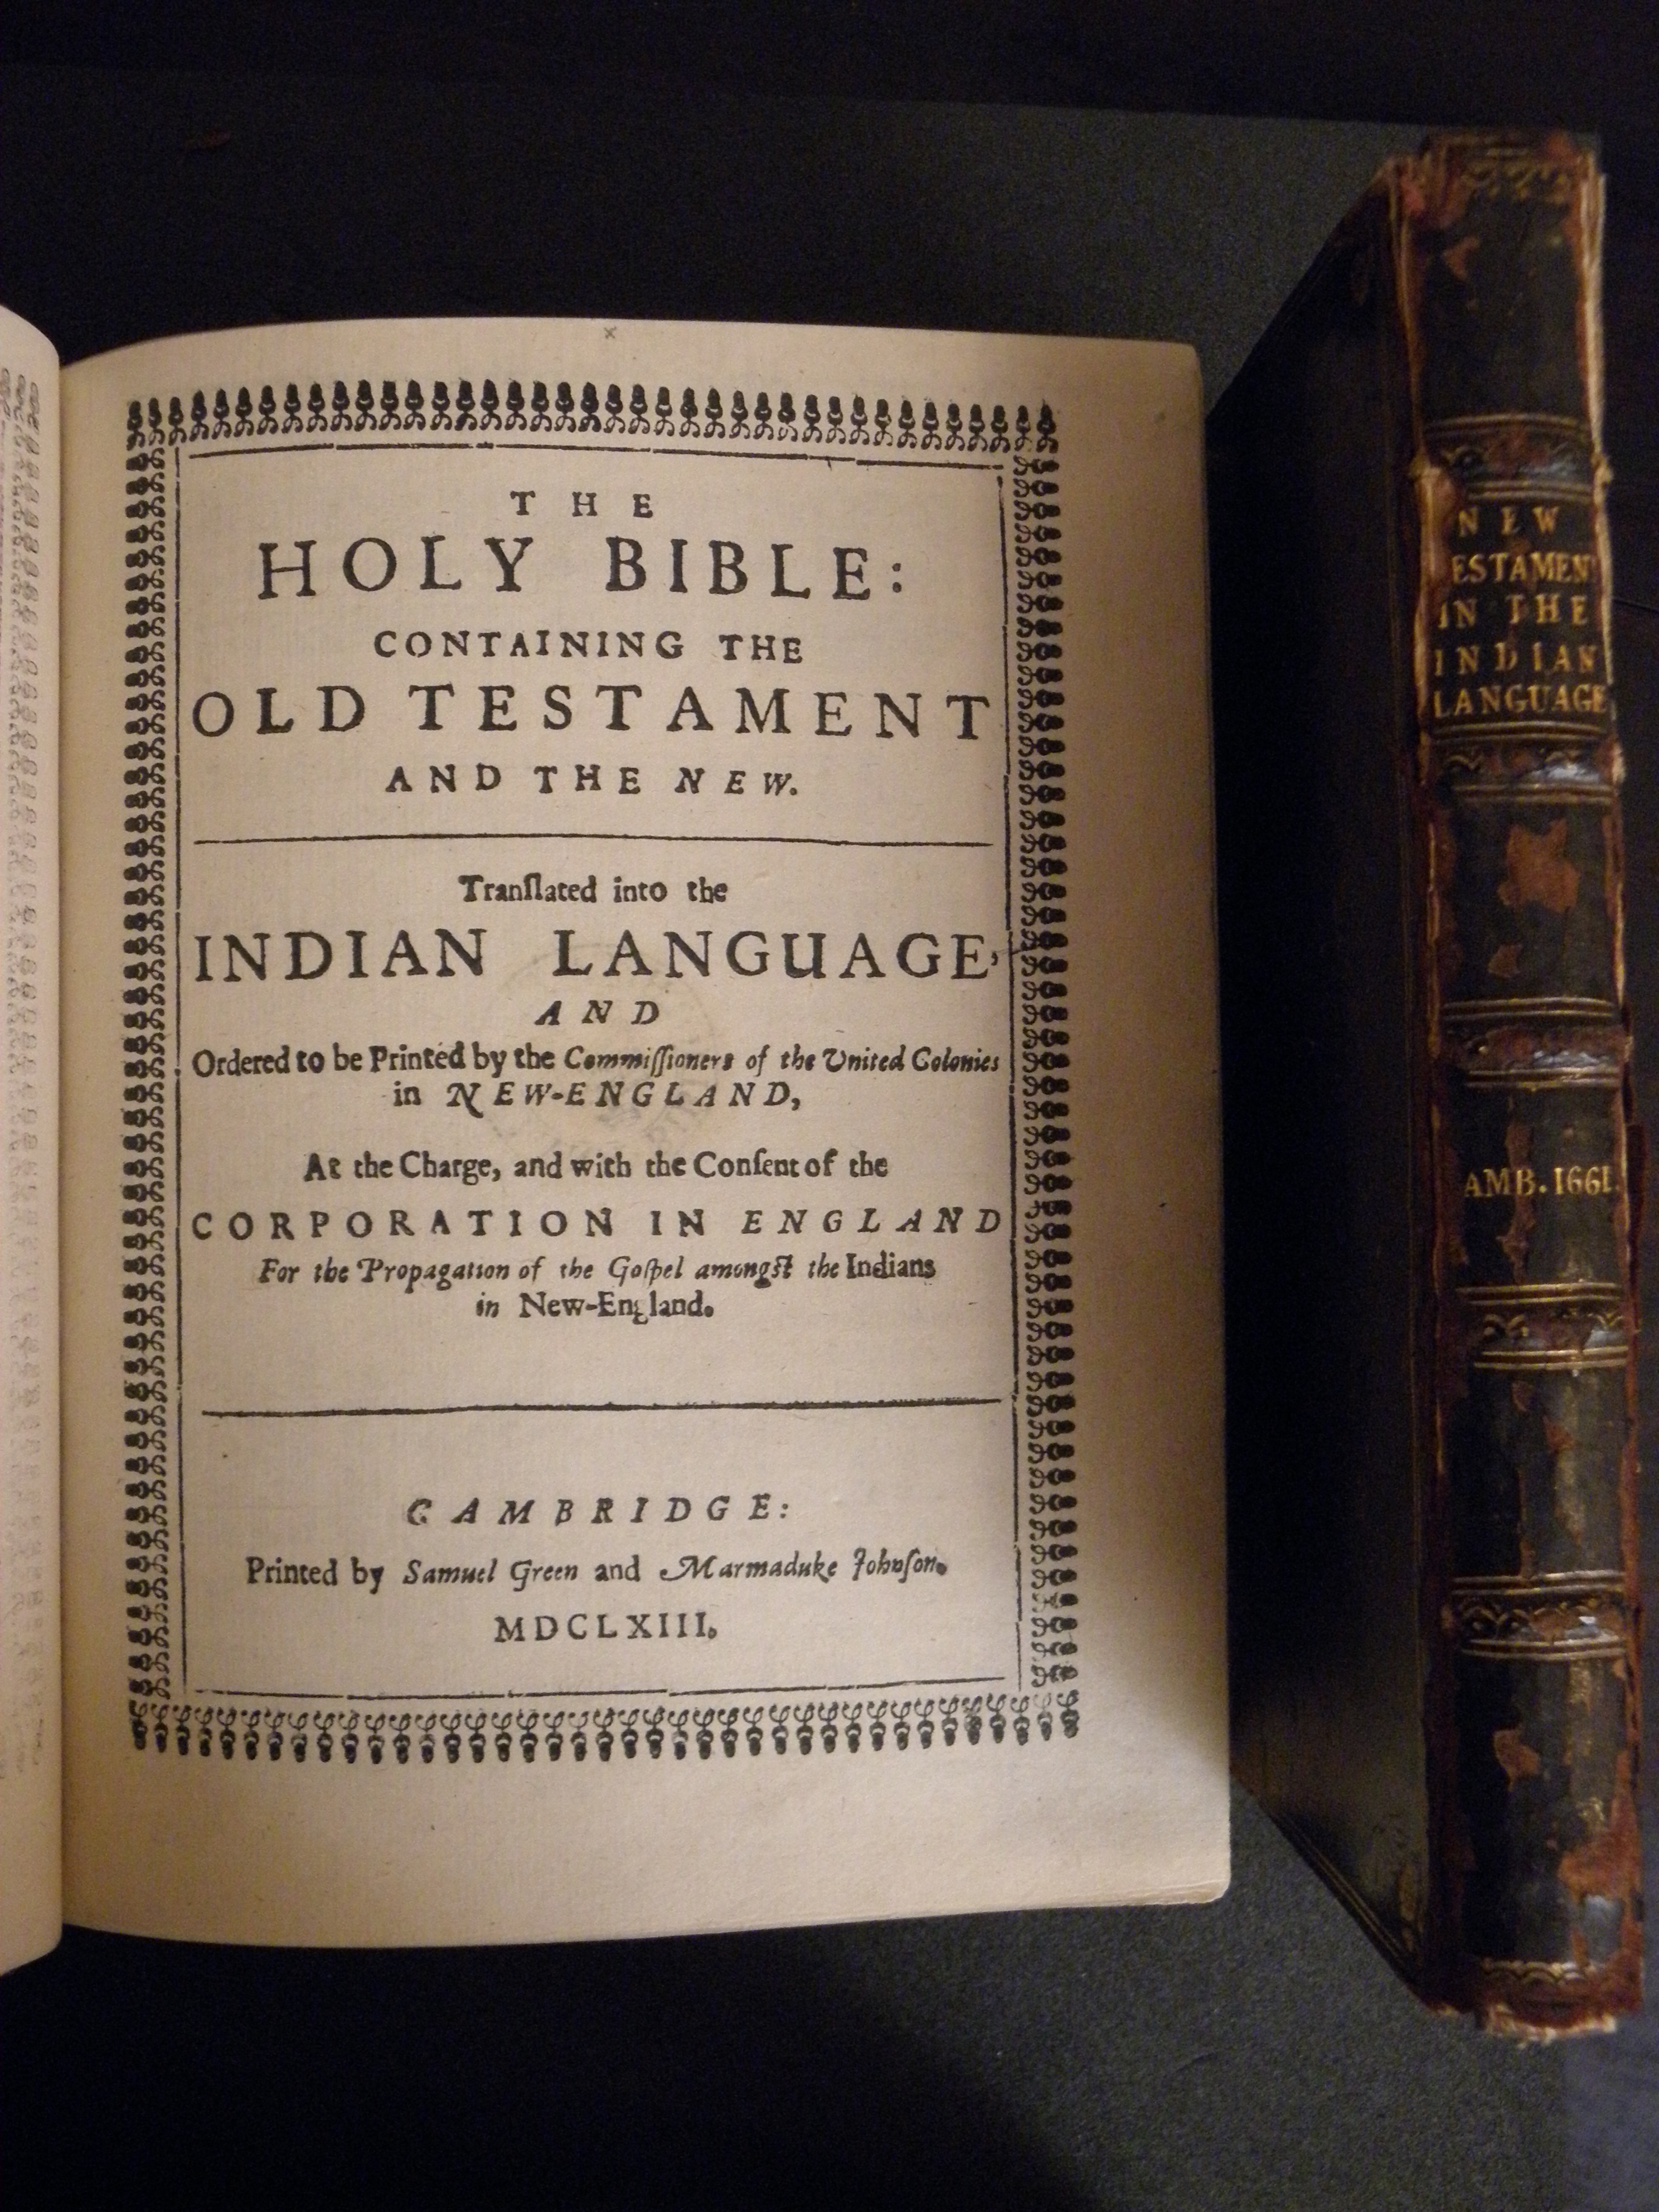 Title page of John Eliot's The Holy Bible: Containing the Old Testament and the New and the spine of his New Testament translation into the Algonquin language. (A 1663 .B53 and A 1661 .B52, respectively. Tracy W. McGregor Library of American History. Photograph by Donna Stapley)